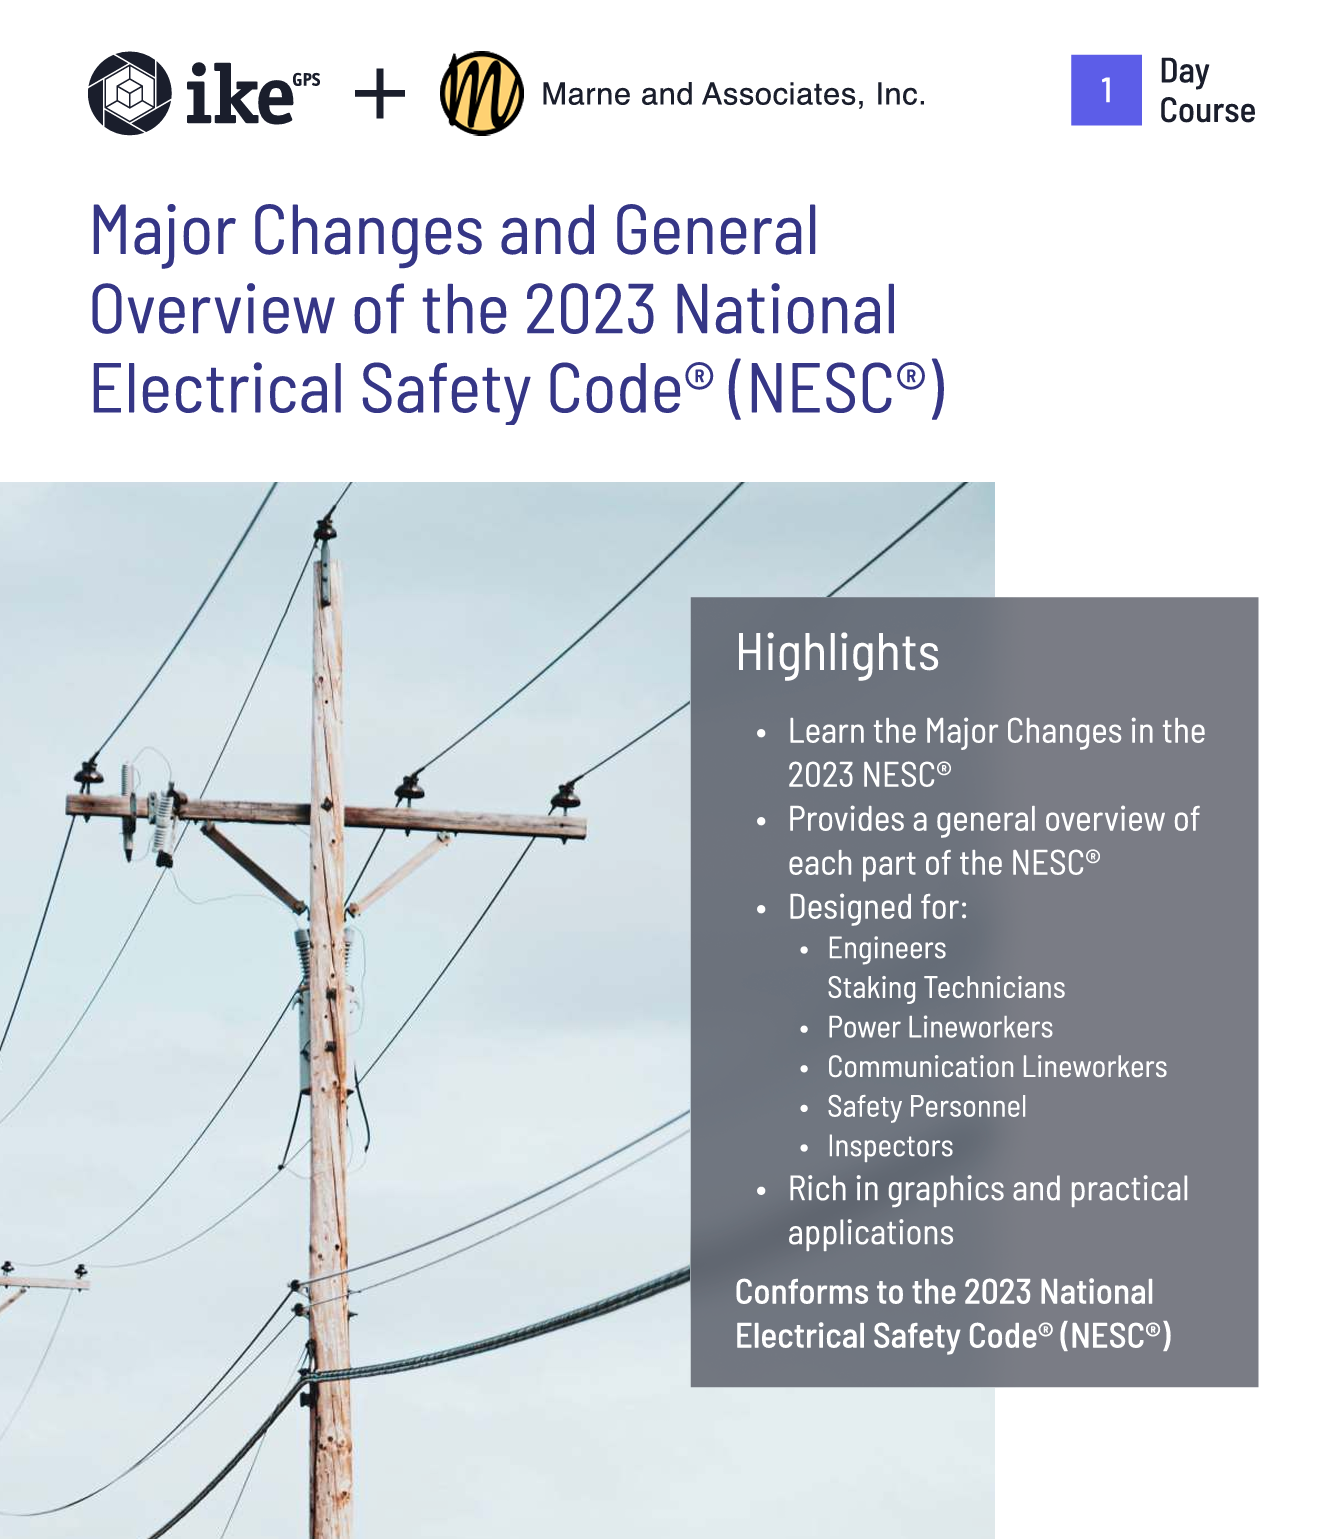 Major Changes and General Overview of the 2023 National Electrical Safety Code® (NESC®)